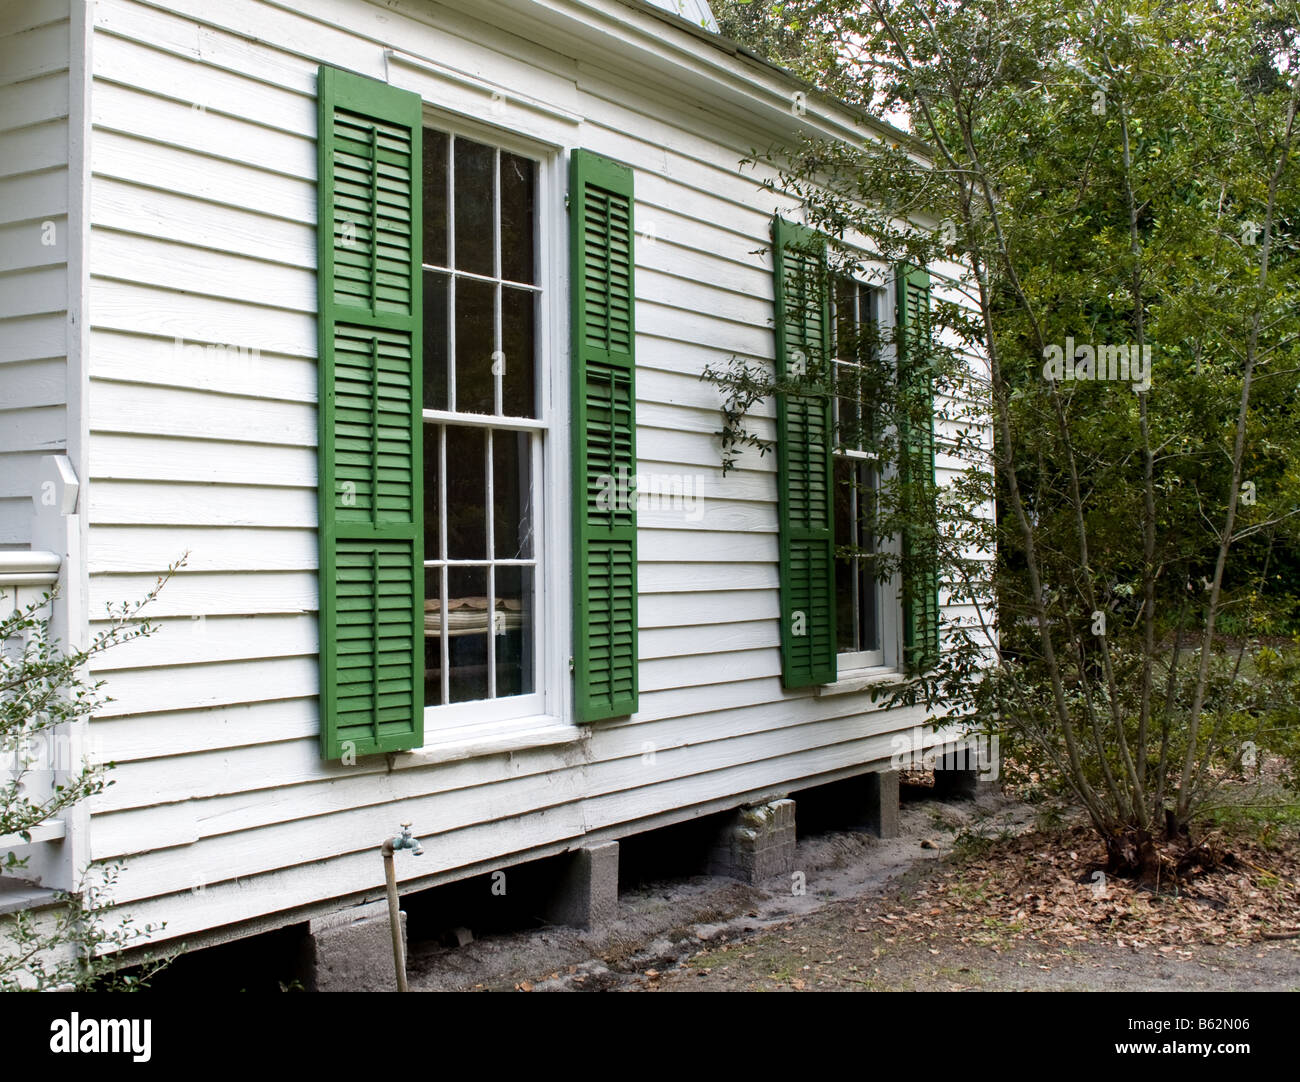 Side of a white house with green shutters on the windows in Mandarin, Jacksonville, Florida Stock Photo